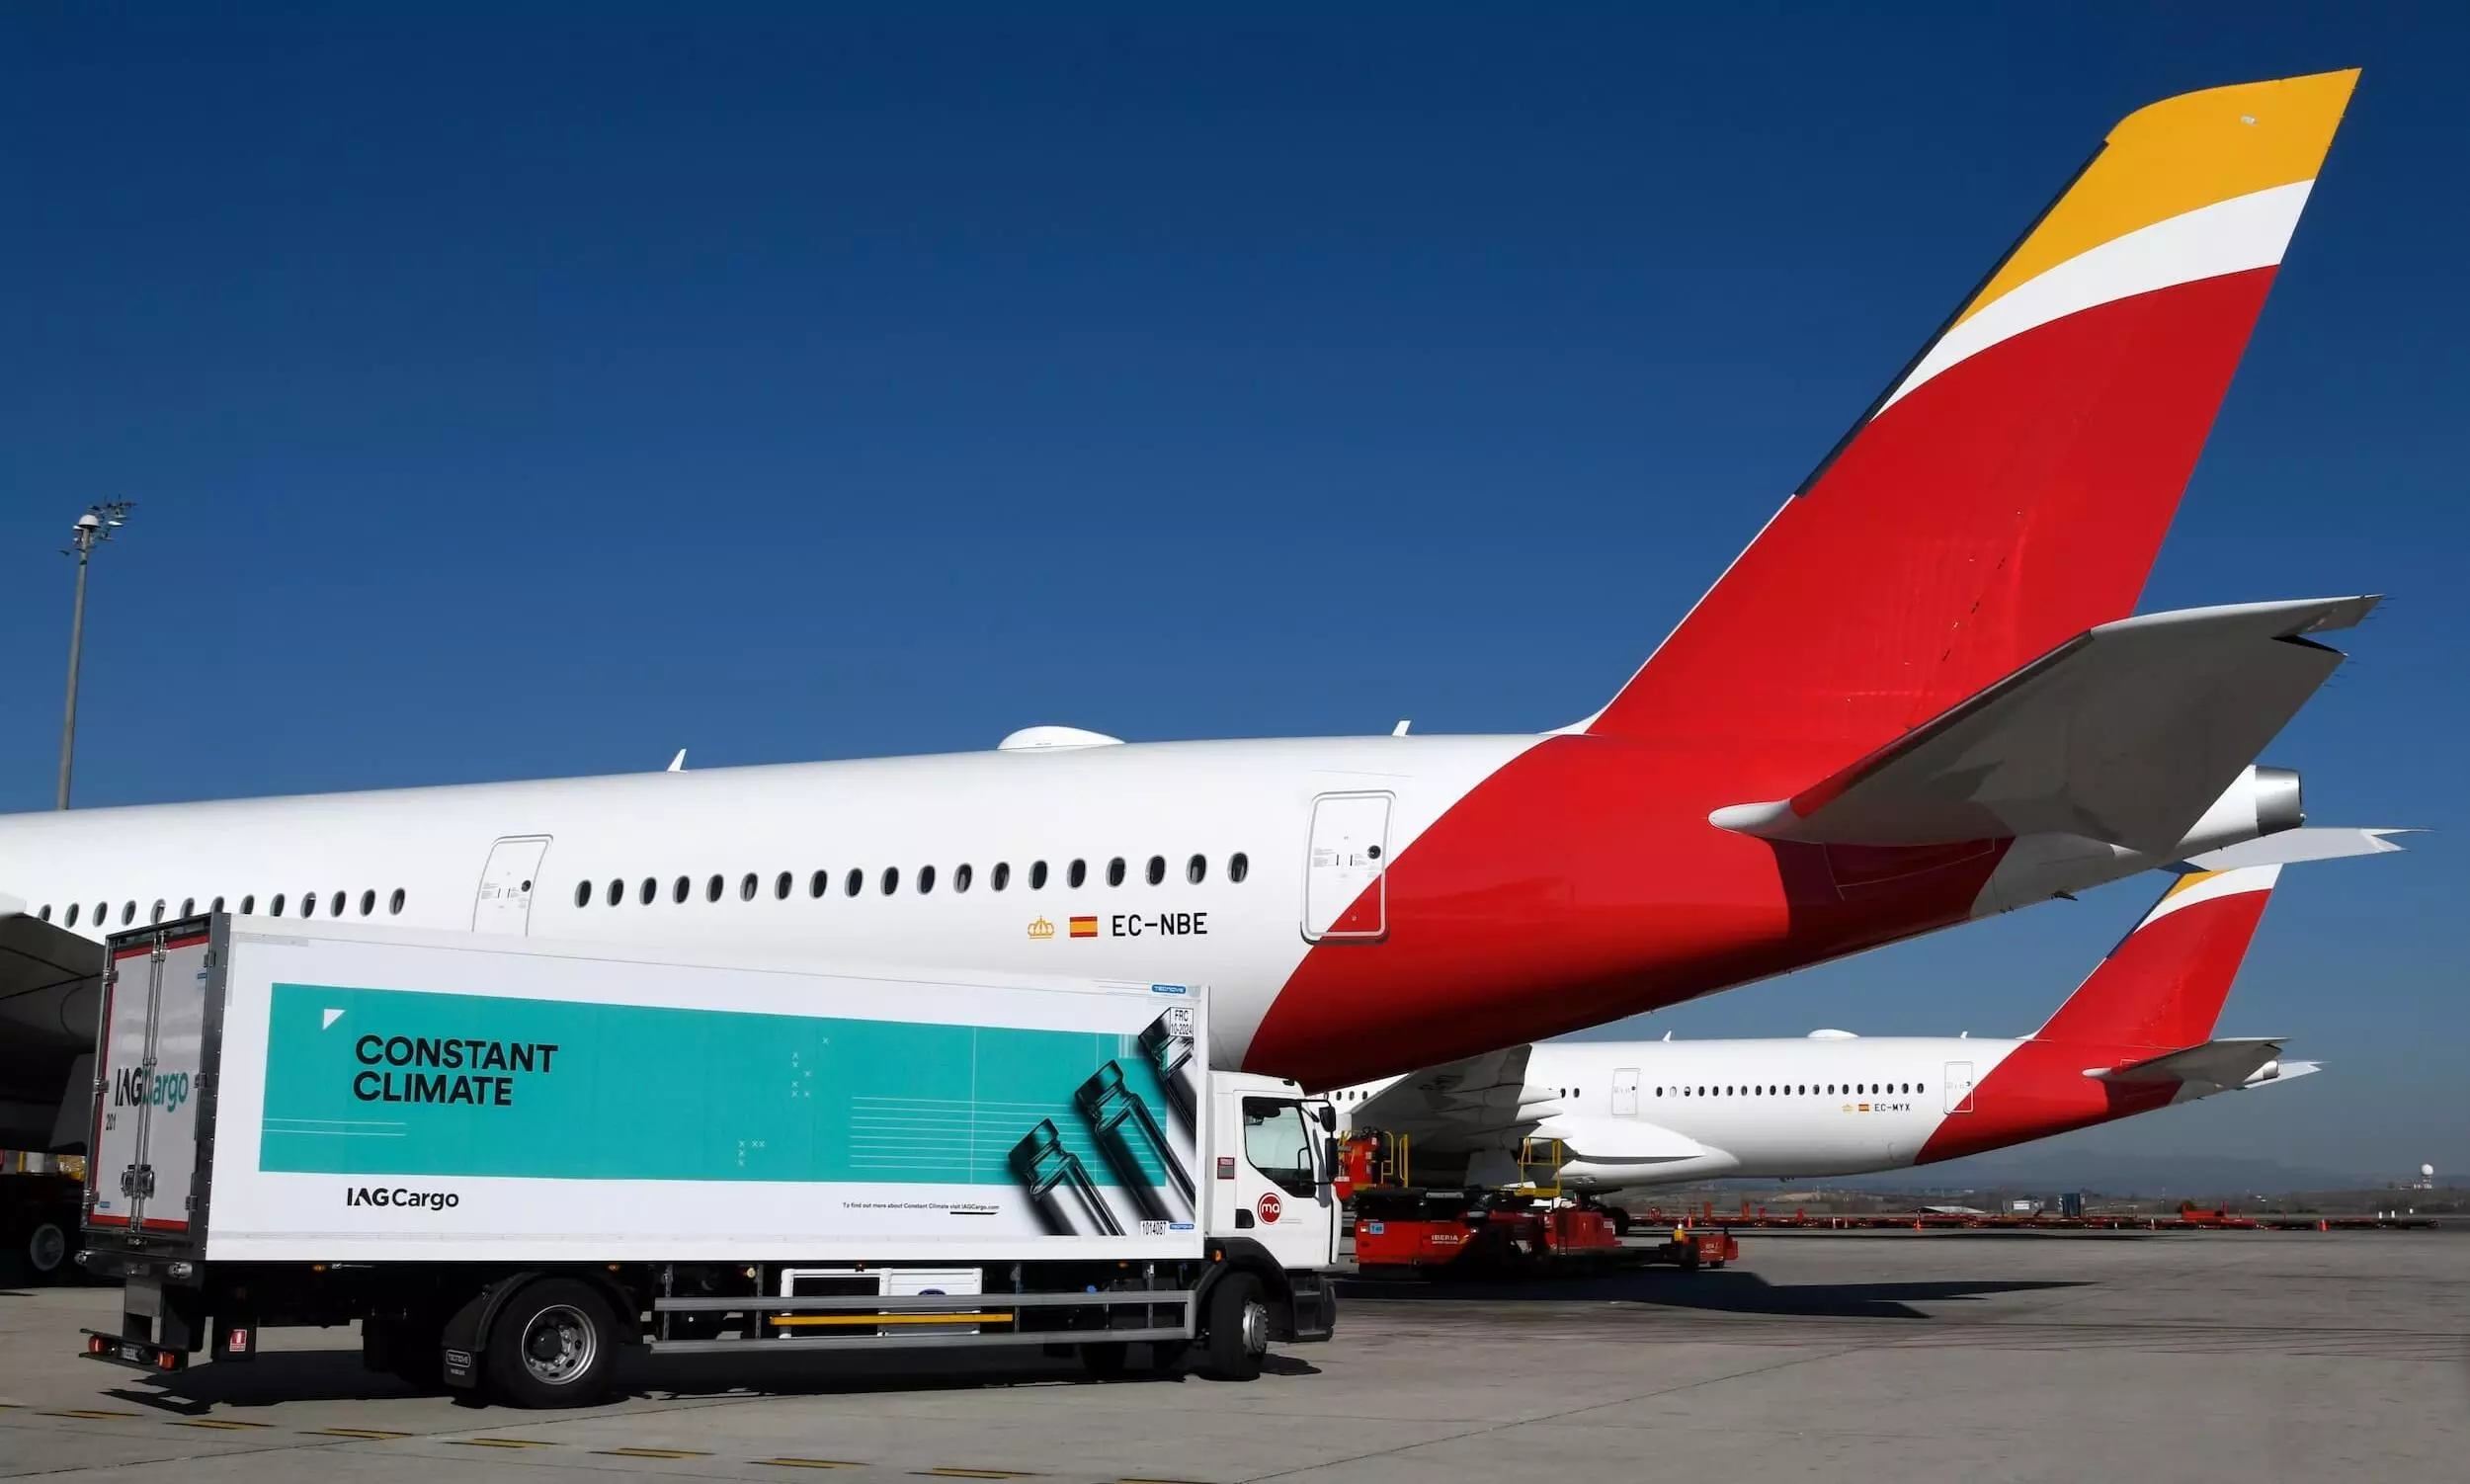 IAG Cargo to fly direct between Madrid and Doha